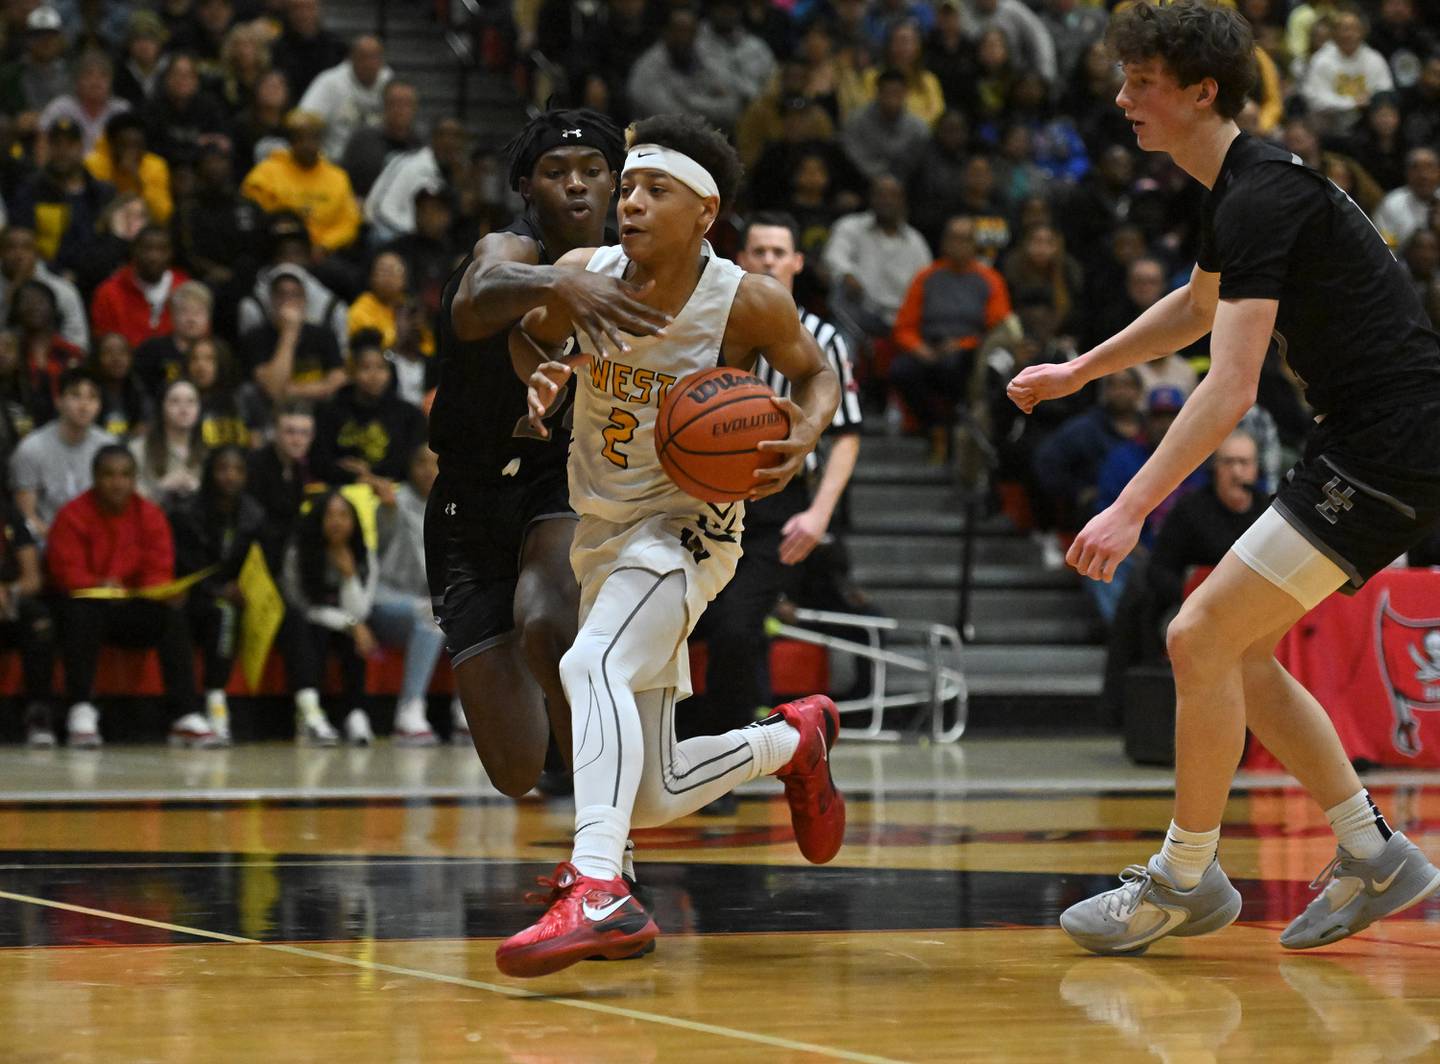 Joliet West's Jeremiah Fears drives to the basket against Oswego East during the Class 4A Bolingbrook Sectional Championship on Friday, March. 03, 2023, at Bolingbrook.